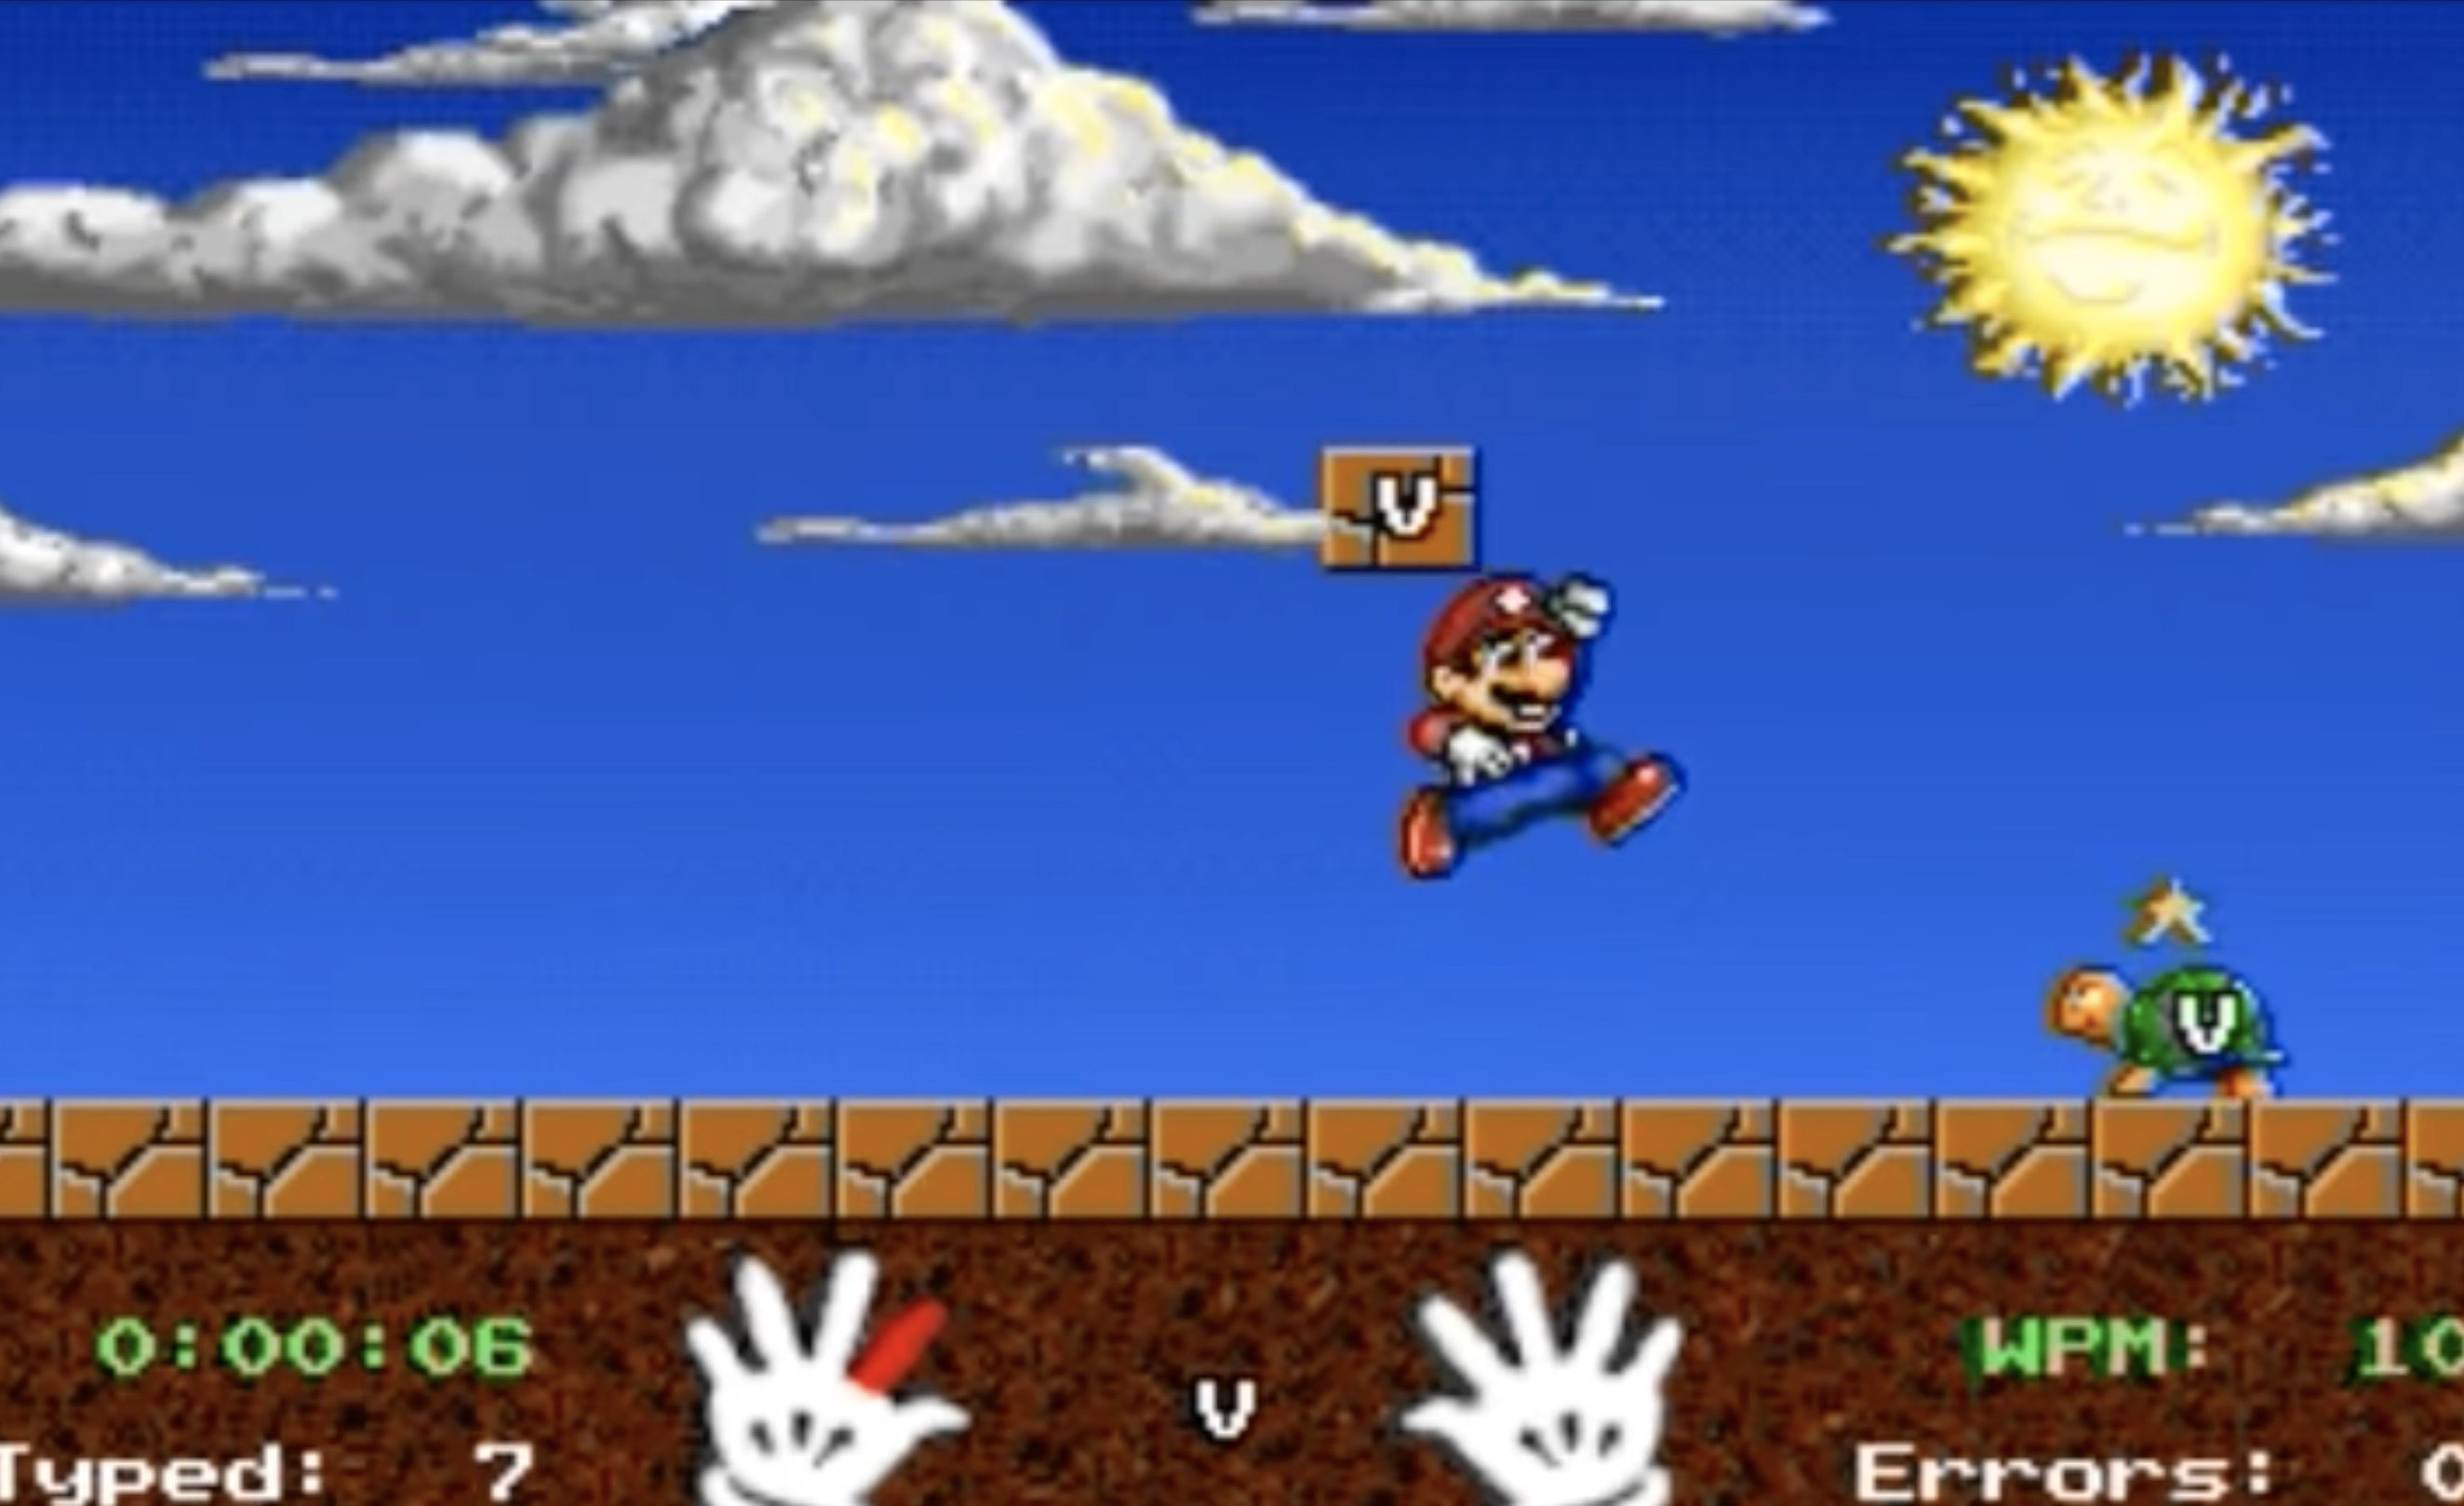 Mario jumps through a level, the player controlling him by typing the prompted letters